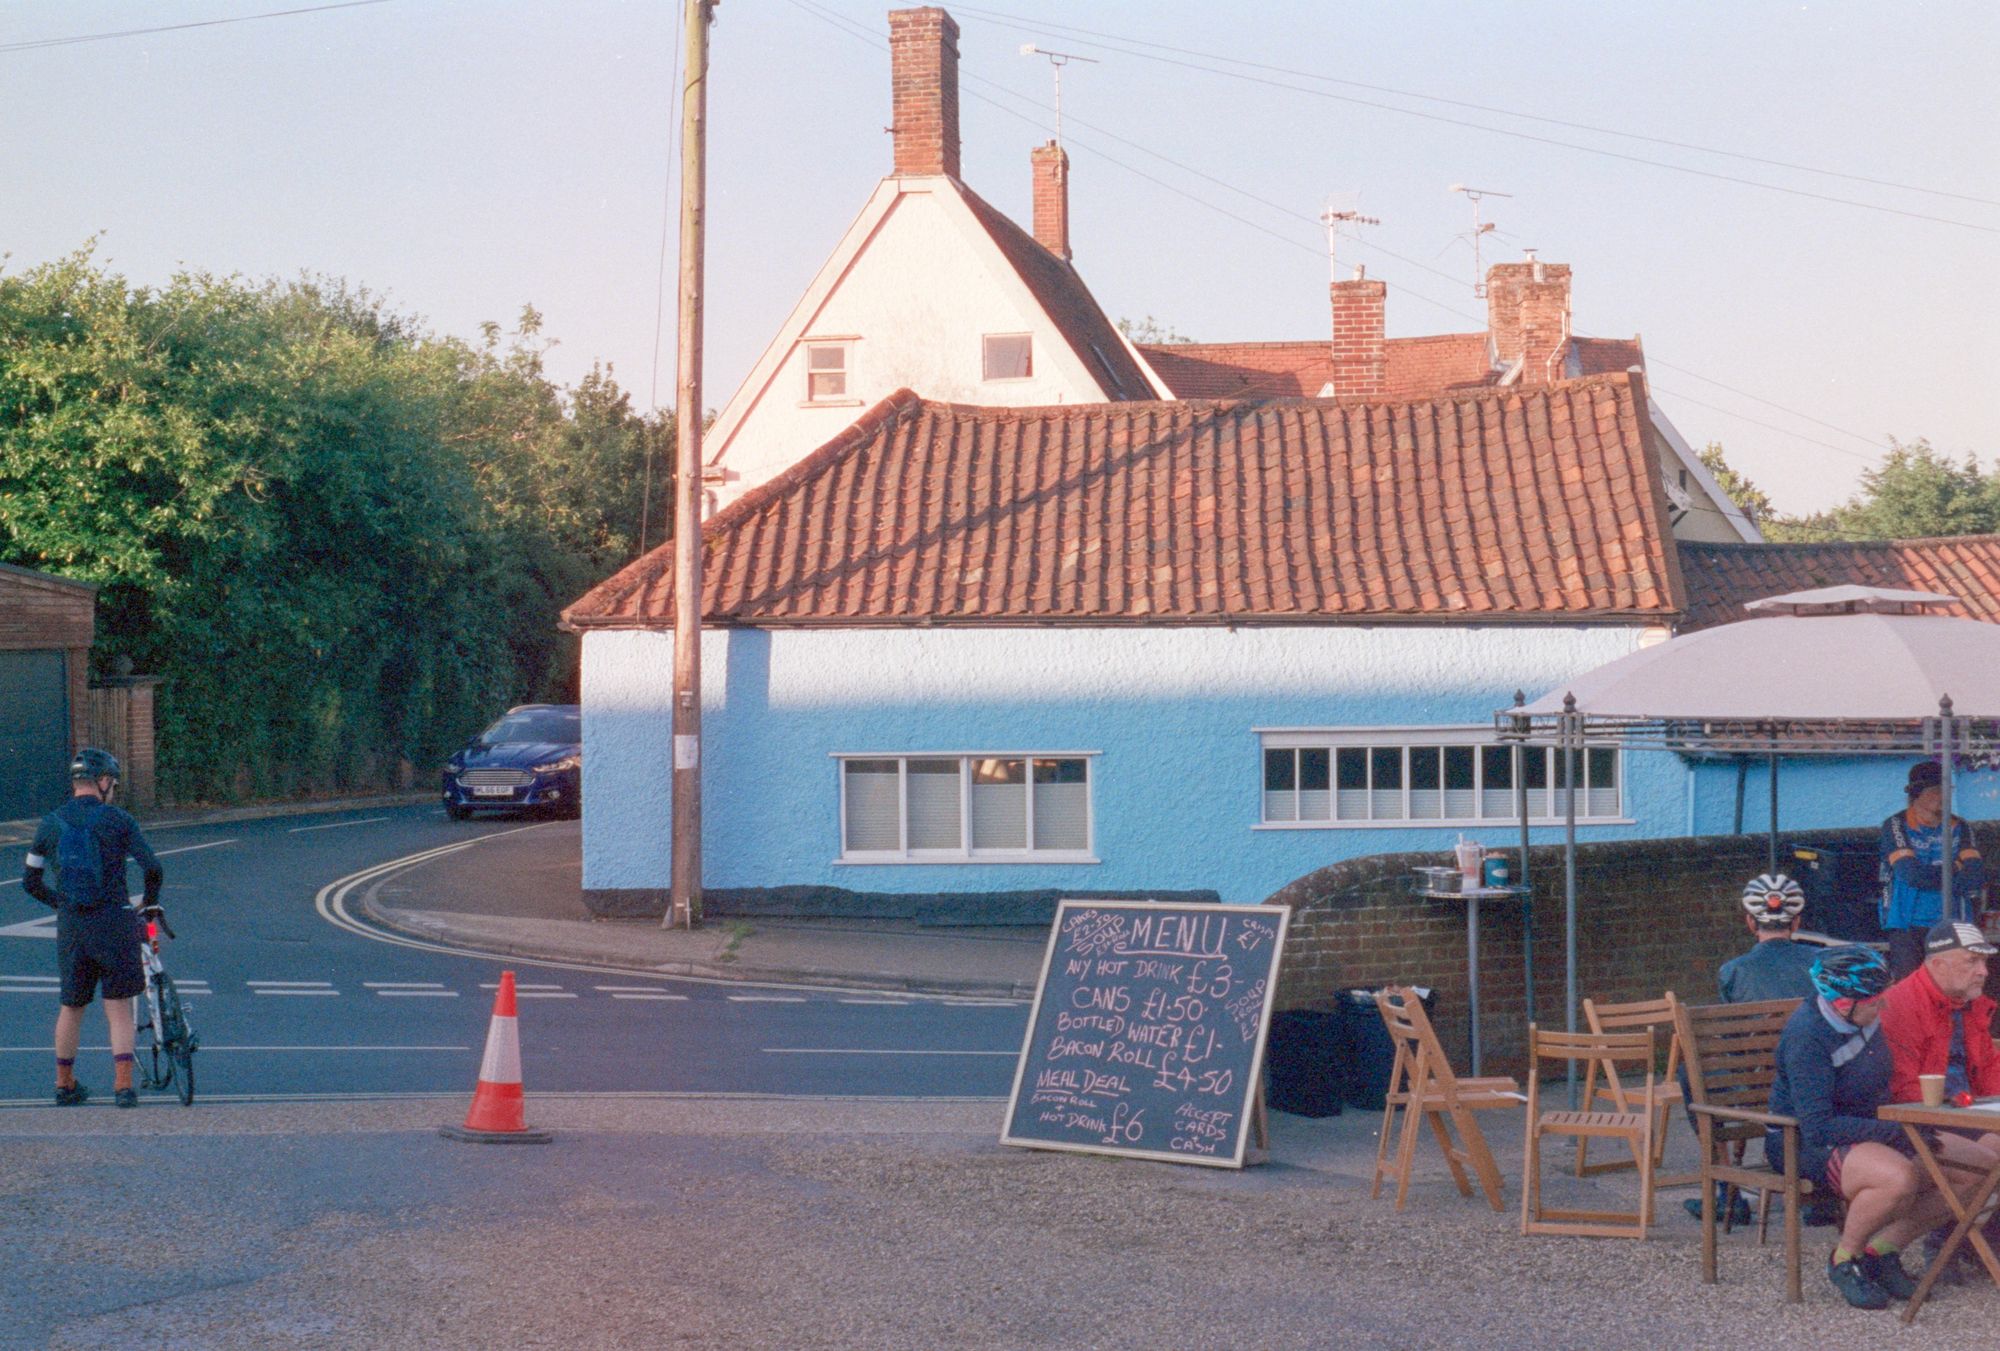 A car park in a village with wooden chairs and a blue building with the sun shining on it. Cyclists sit on the chairs. A chalkboard reads: "Menu: Crisps £1, soup £3+roll, cakes £2.50, any hot drink £3, Soup + Roll £3, Cans £1.50, Bottled water £1, Bacon roll £4.50, meal deal: Bacon roll + hot drink £6, accept cards + cash."